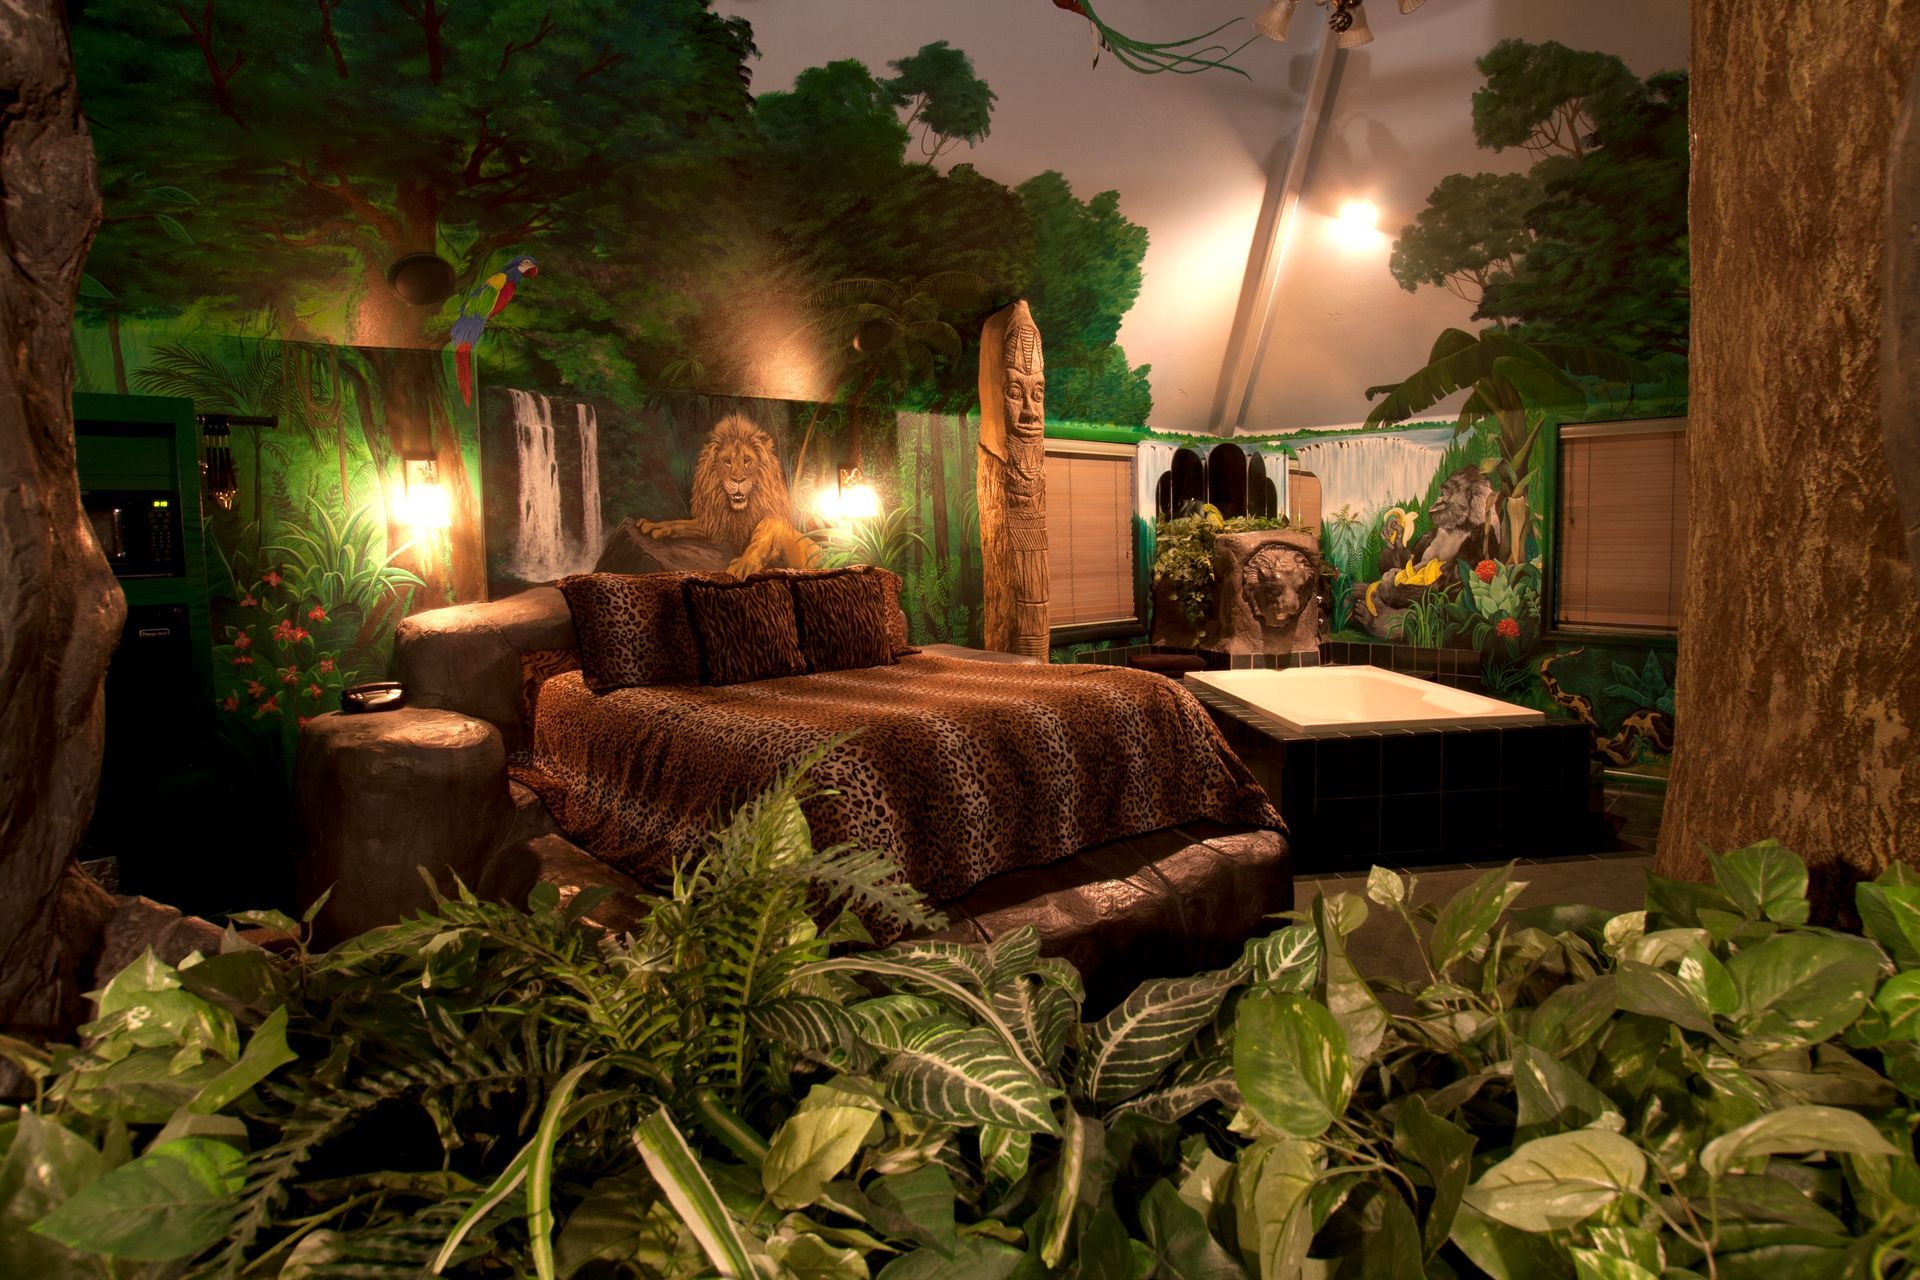 A bedroom with a bed and a painting of a jungle on the wall.